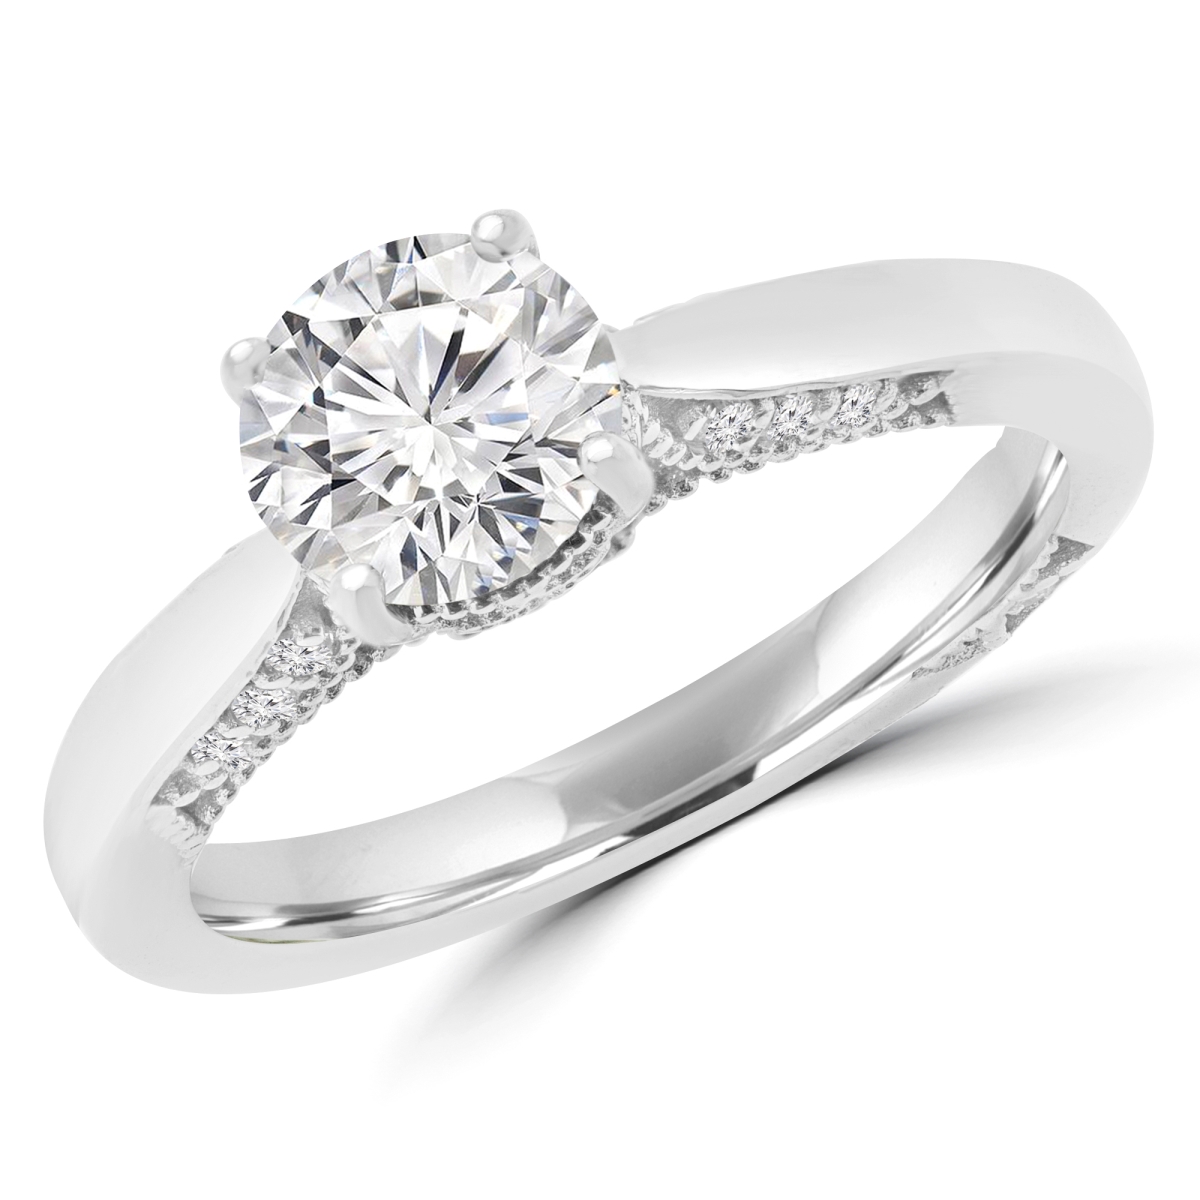 Picture of Majesty Diamonds MD170228 1.125 CTW Round Diamond Solitaire with Accents Engagement Ring in 18K